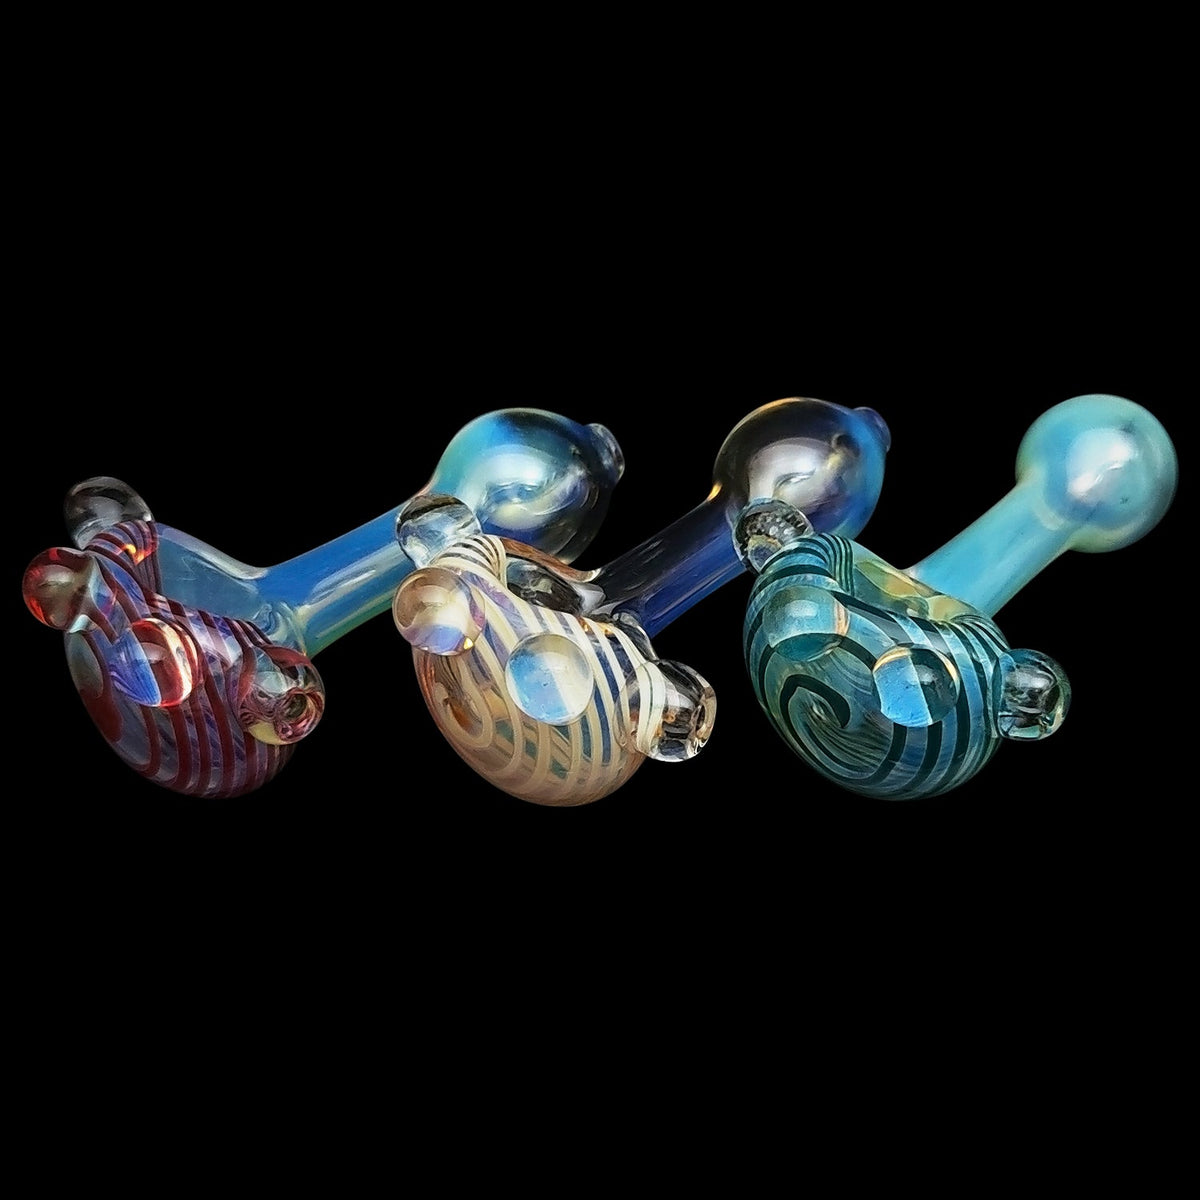 The "Spiral Marble Head" Glass Spoon Pipe